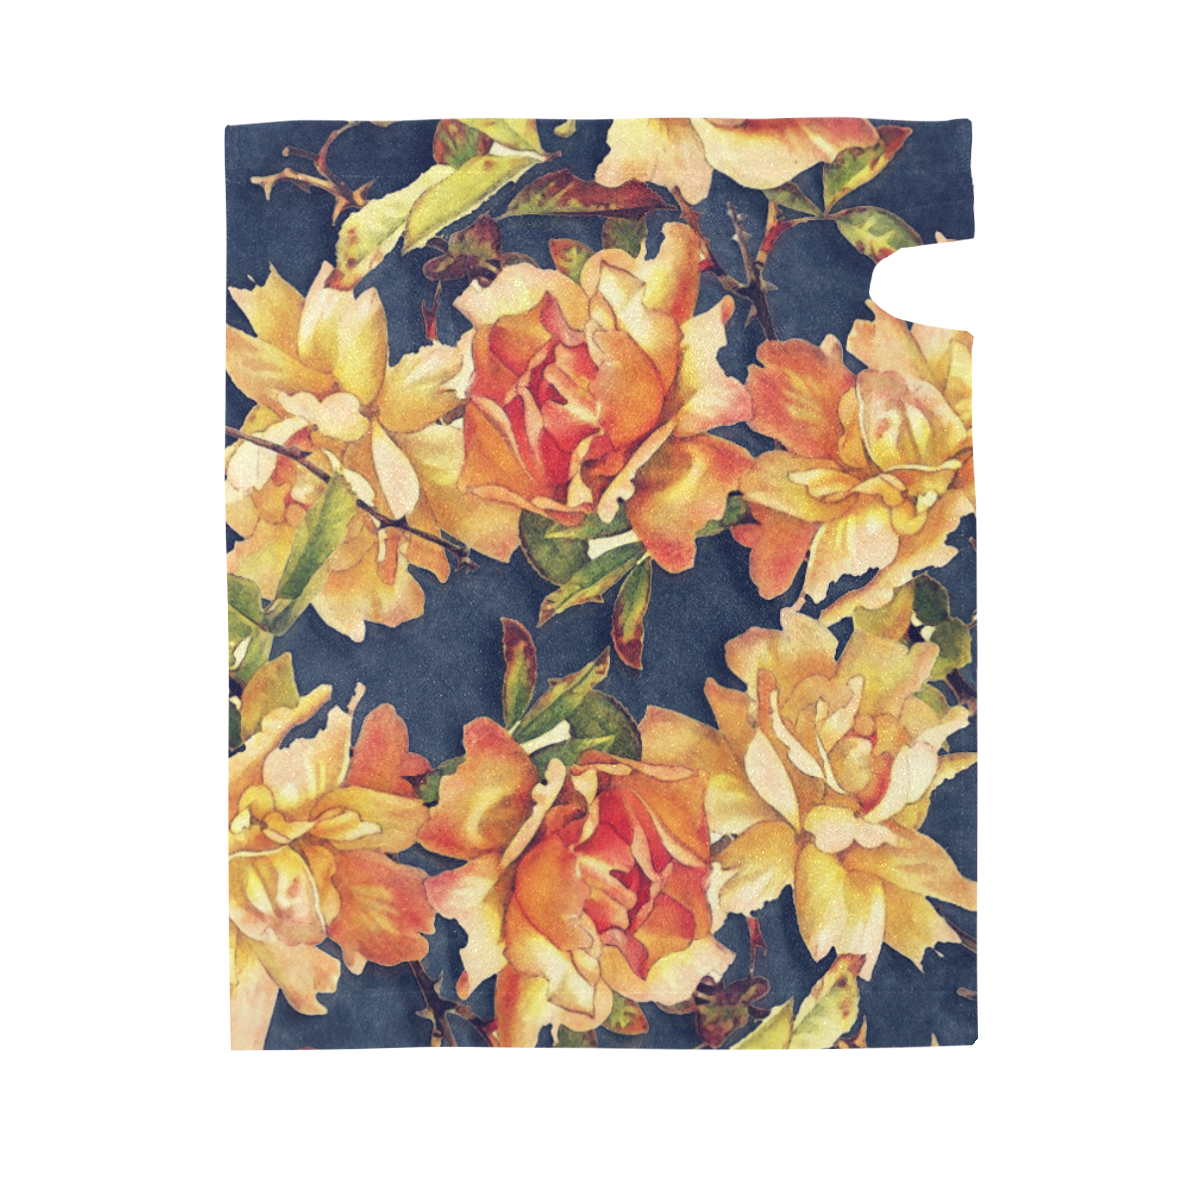 flowers #flowers #pattern #flora Mailbox Cover